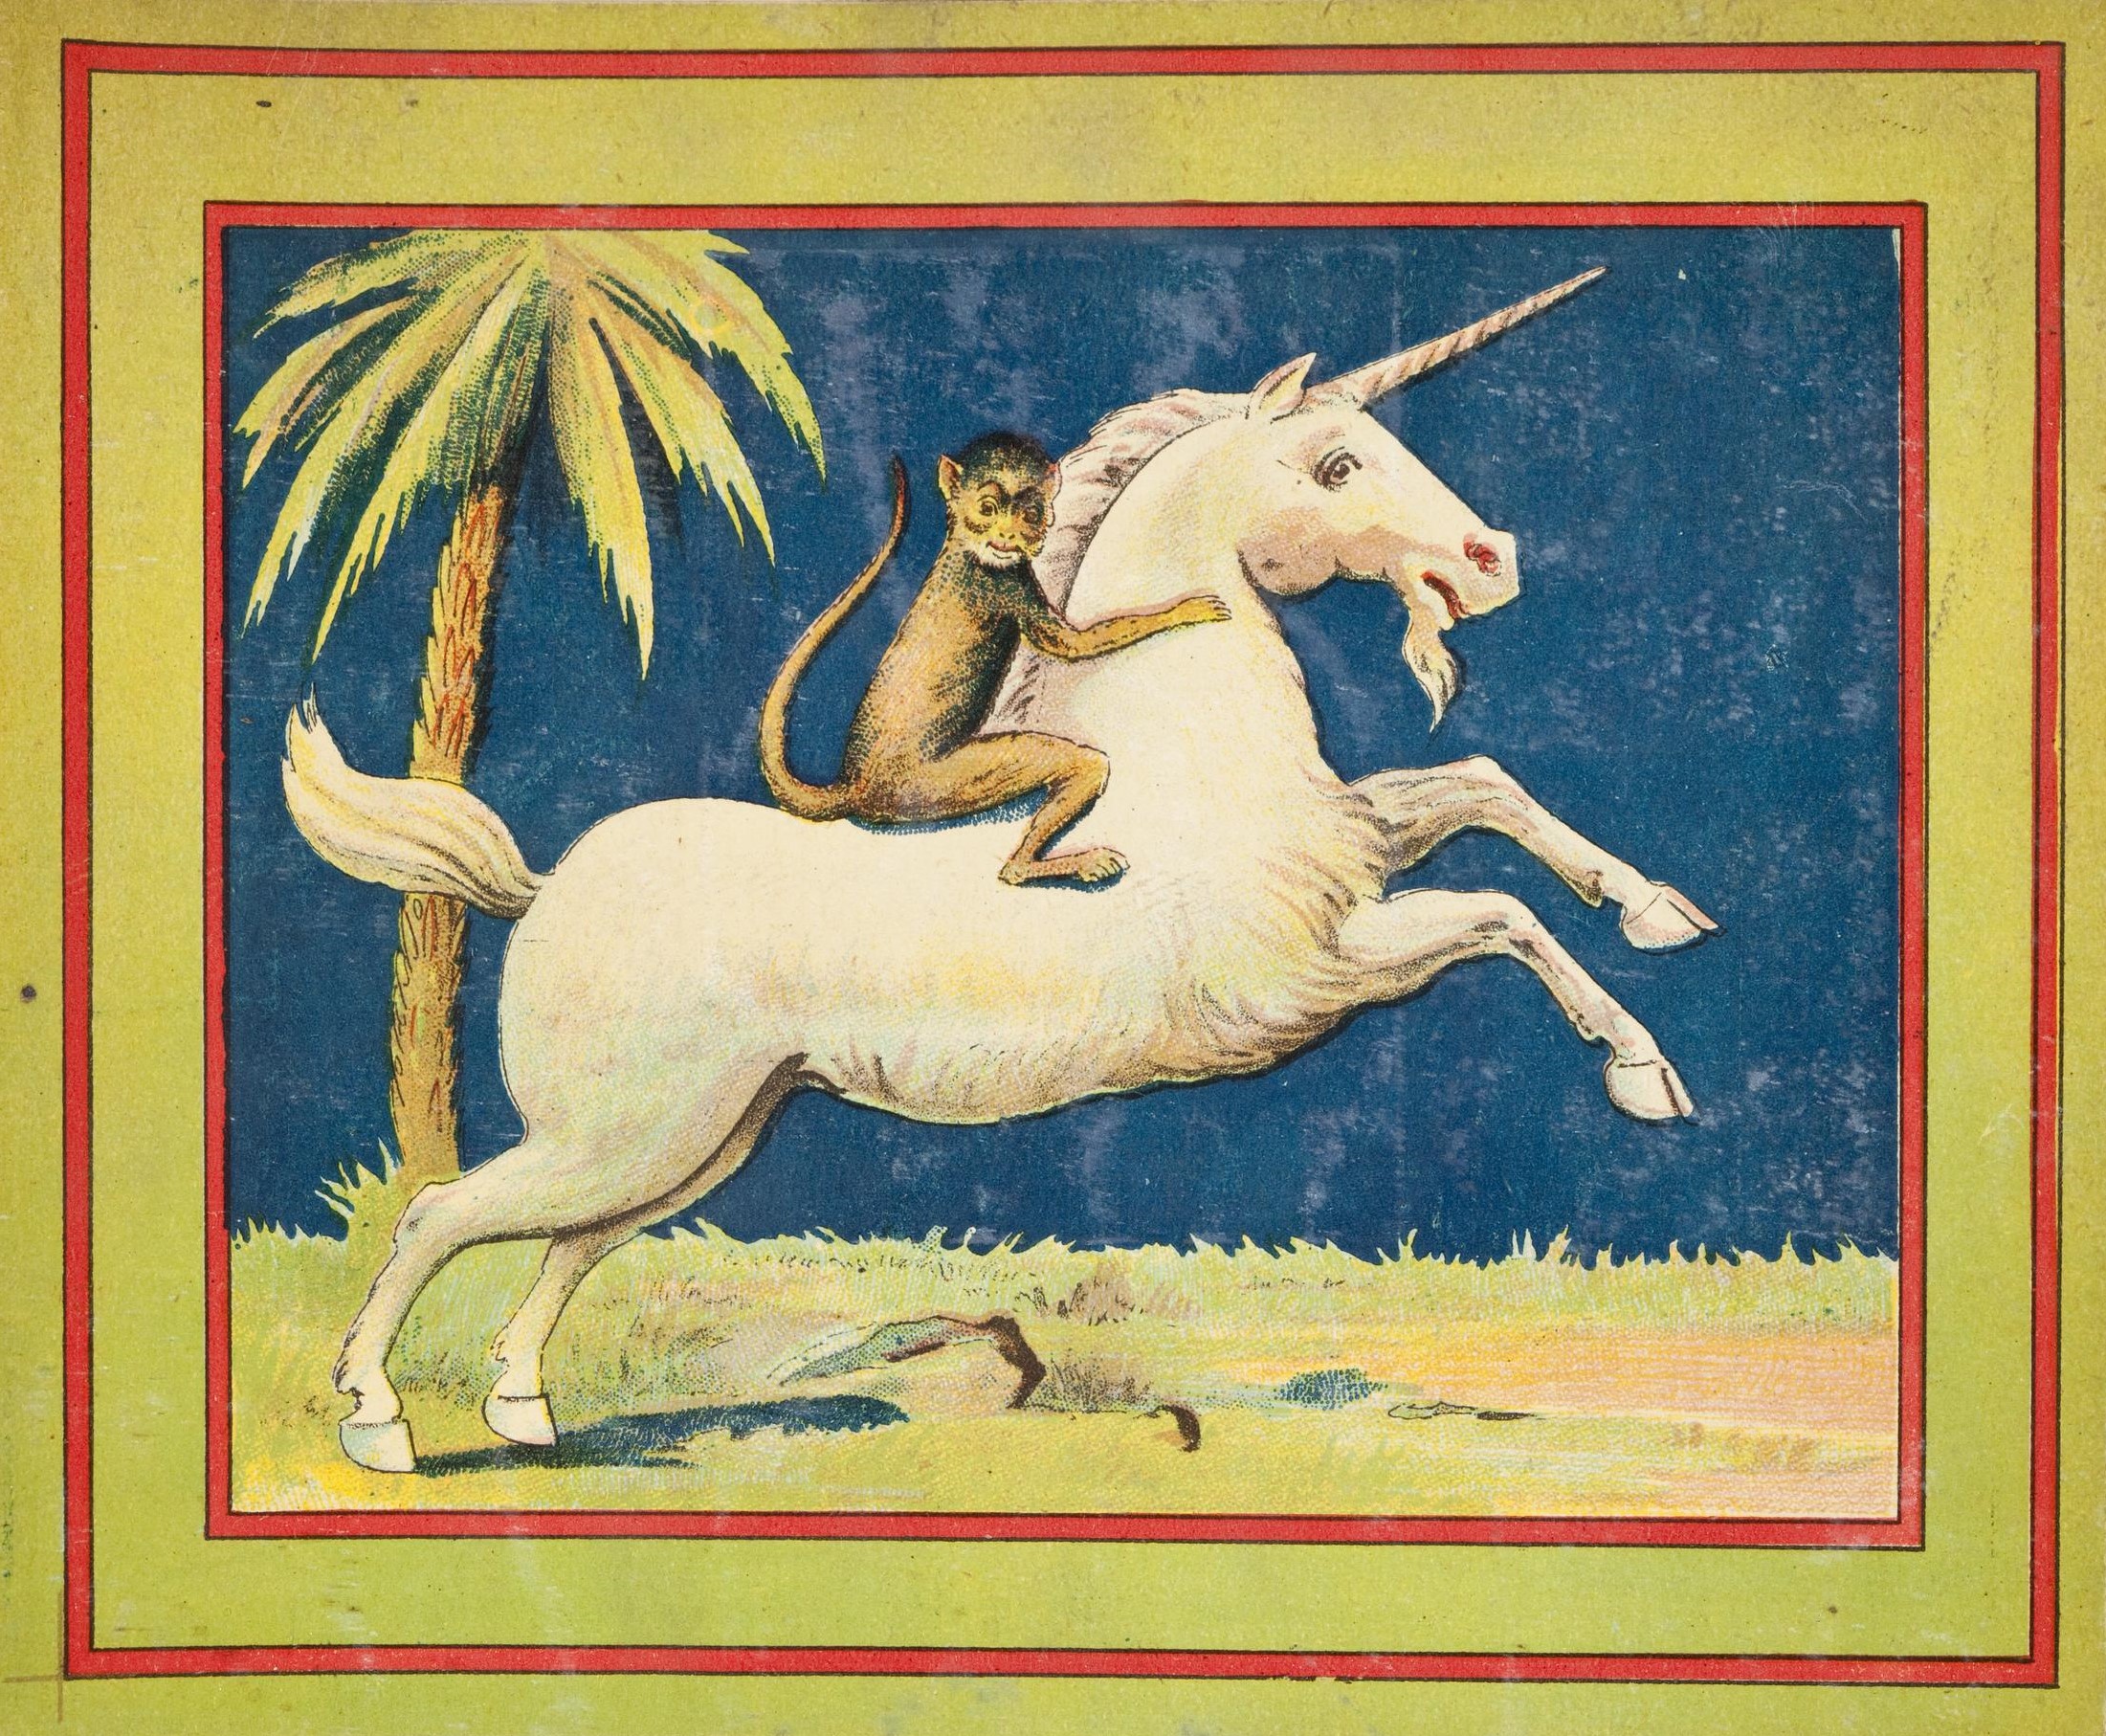 A shipper's ticket from the collection at the Museum of Science and Industry showing a monkey riding a unicorn